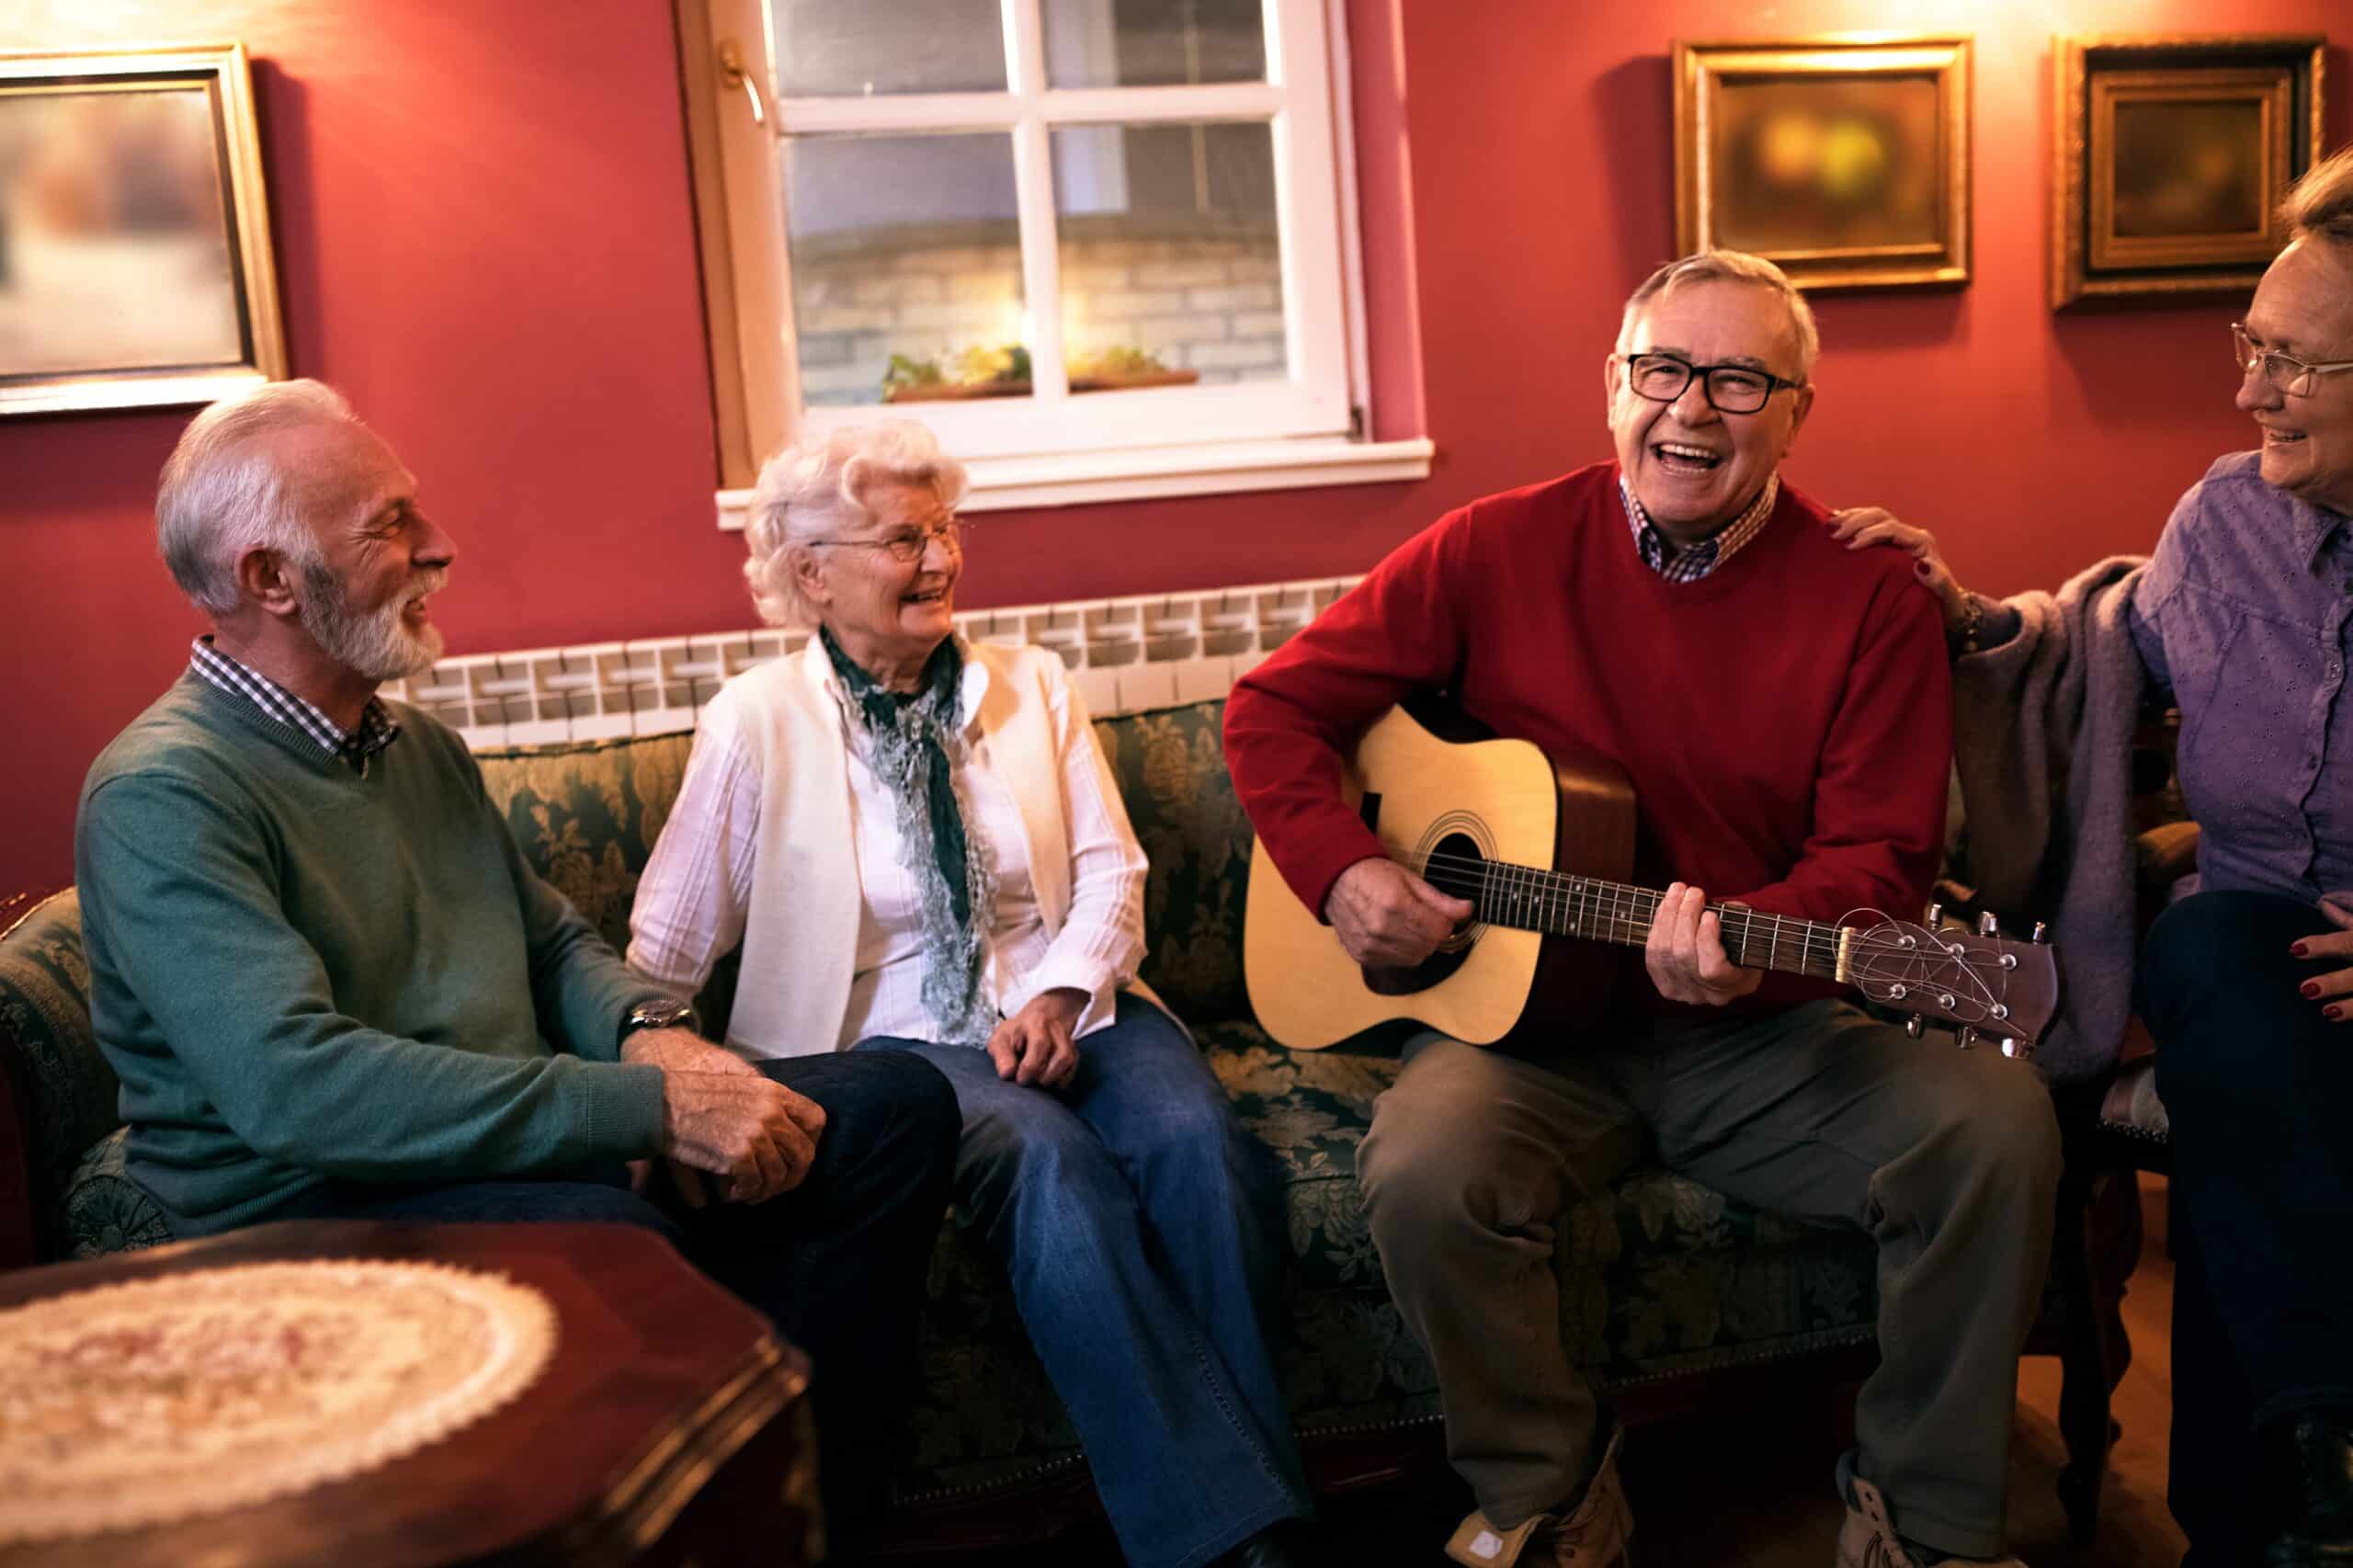 Group of four seniors sitting, one playing guitar